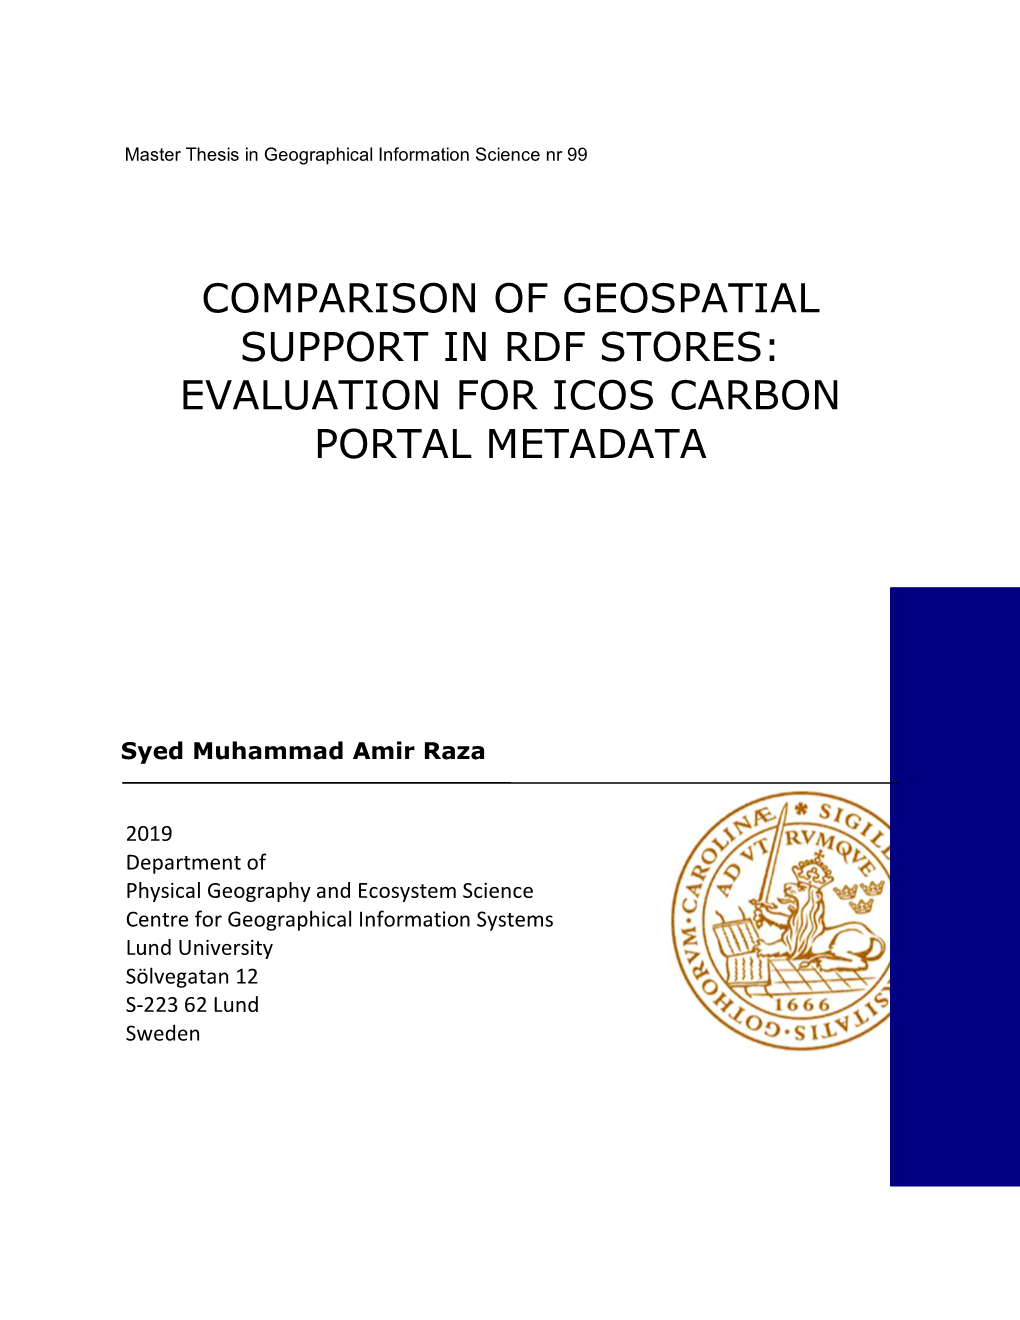 Comparison of Geospatial Support in Rdf Stores: Evaluation for Icos Carbon